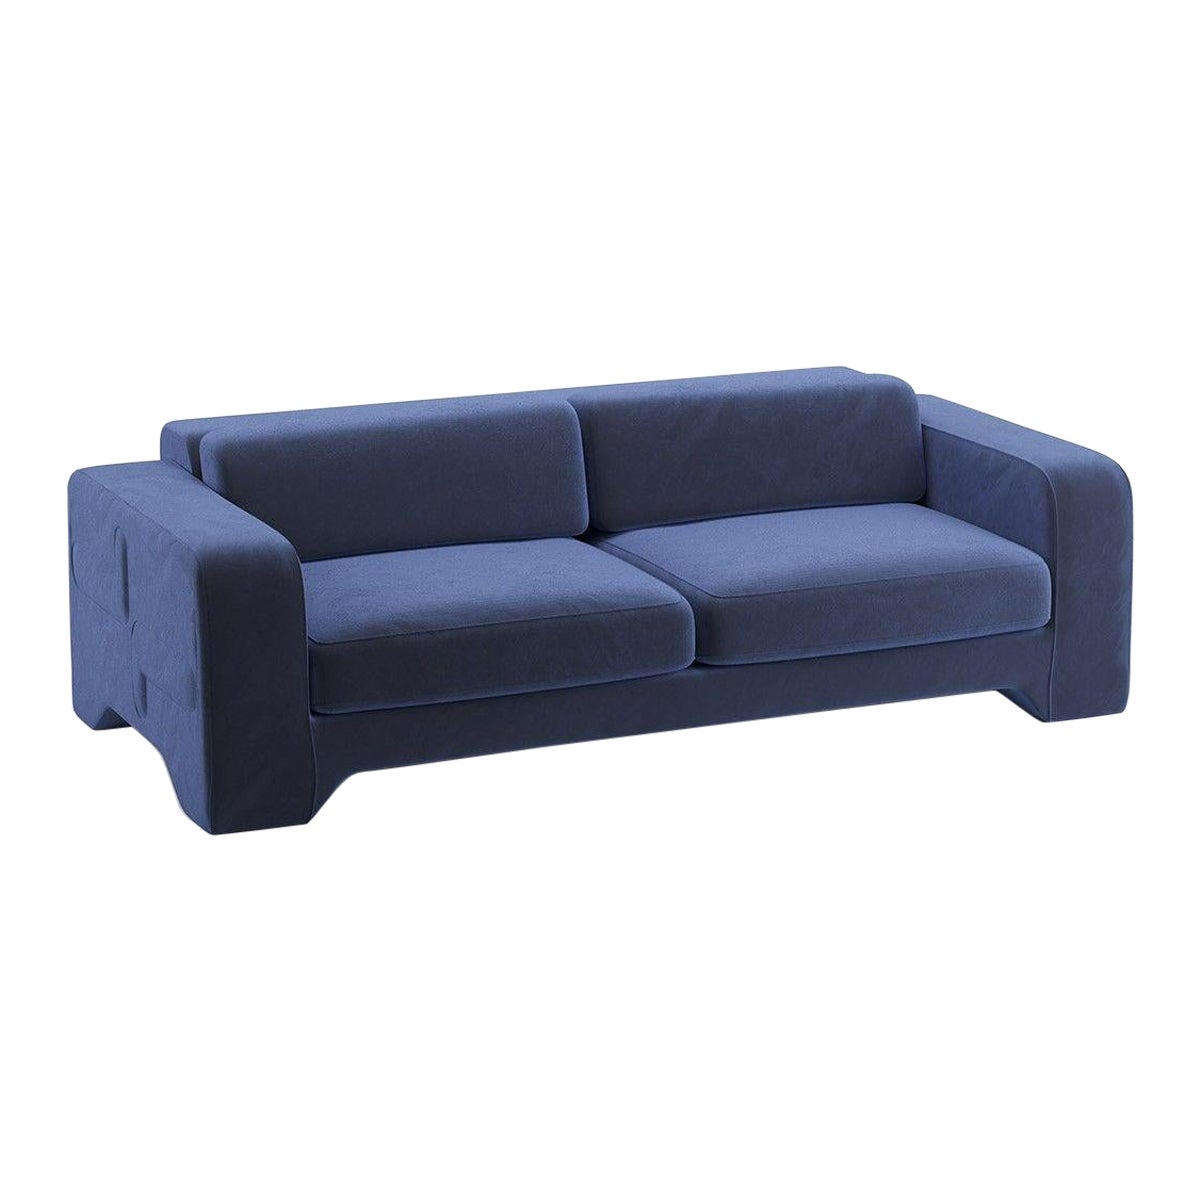 Popus Editions Giovanna 4 Seater Sofa in Navy Verone Velvet Upholstery For Sale